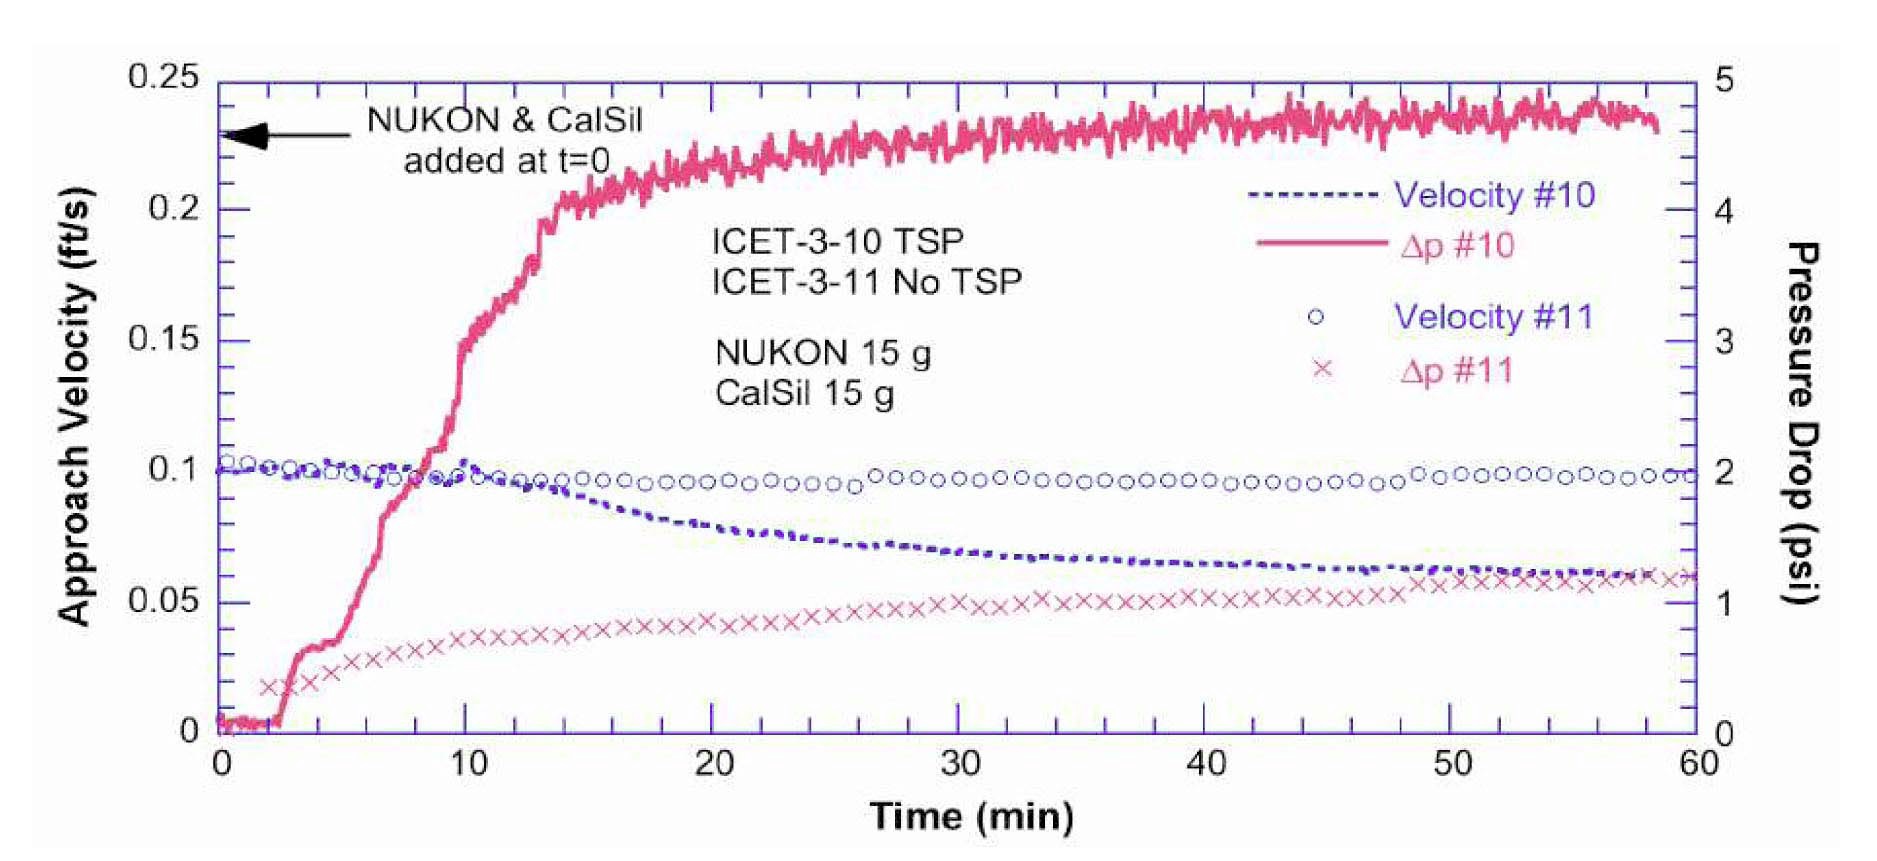 Fiber Debris Bed Approach Velocity and Differential Pressures Across the Strainer as a Function of Time [18]. Note that ICET-3-10 (#10) was Tested with TSP but ICET-3-11 (#11) was Tested without TSP. 1 psi=6.895 kPa; 0.1 ft/s=0.03 m/s.